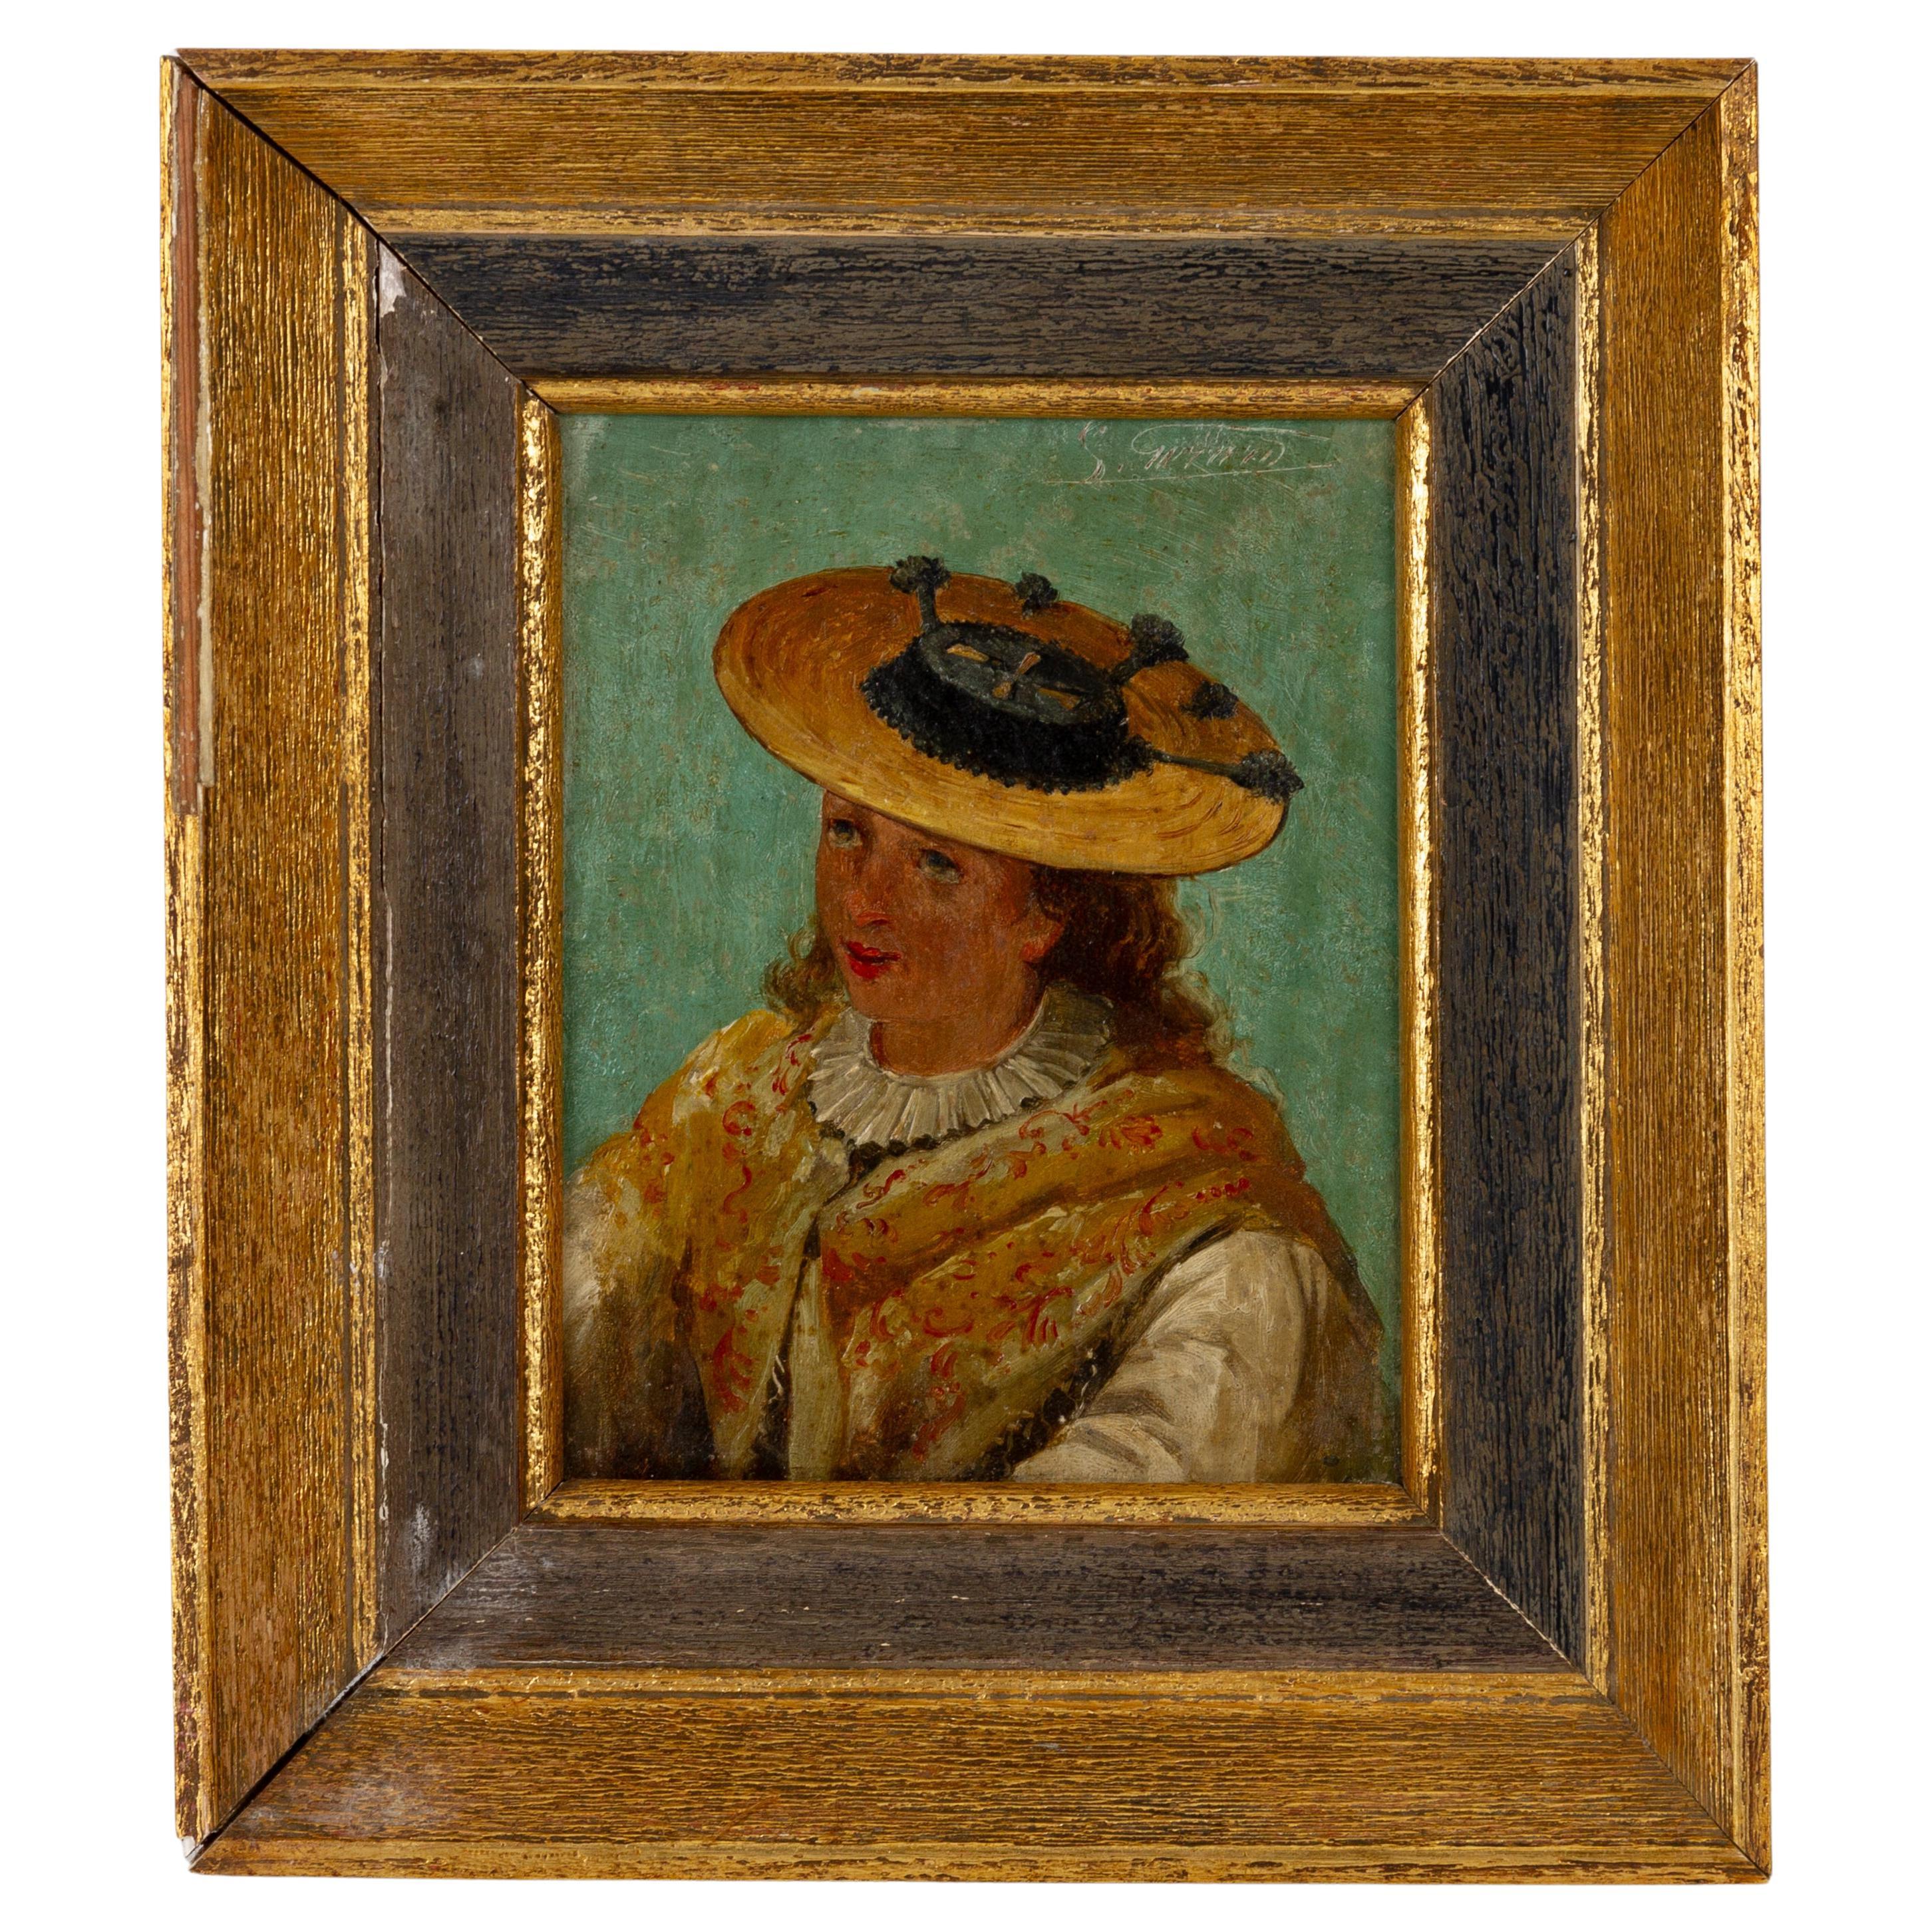 Attributed to Emile Wauters (1846-1933) Belgian Portrait For Sale